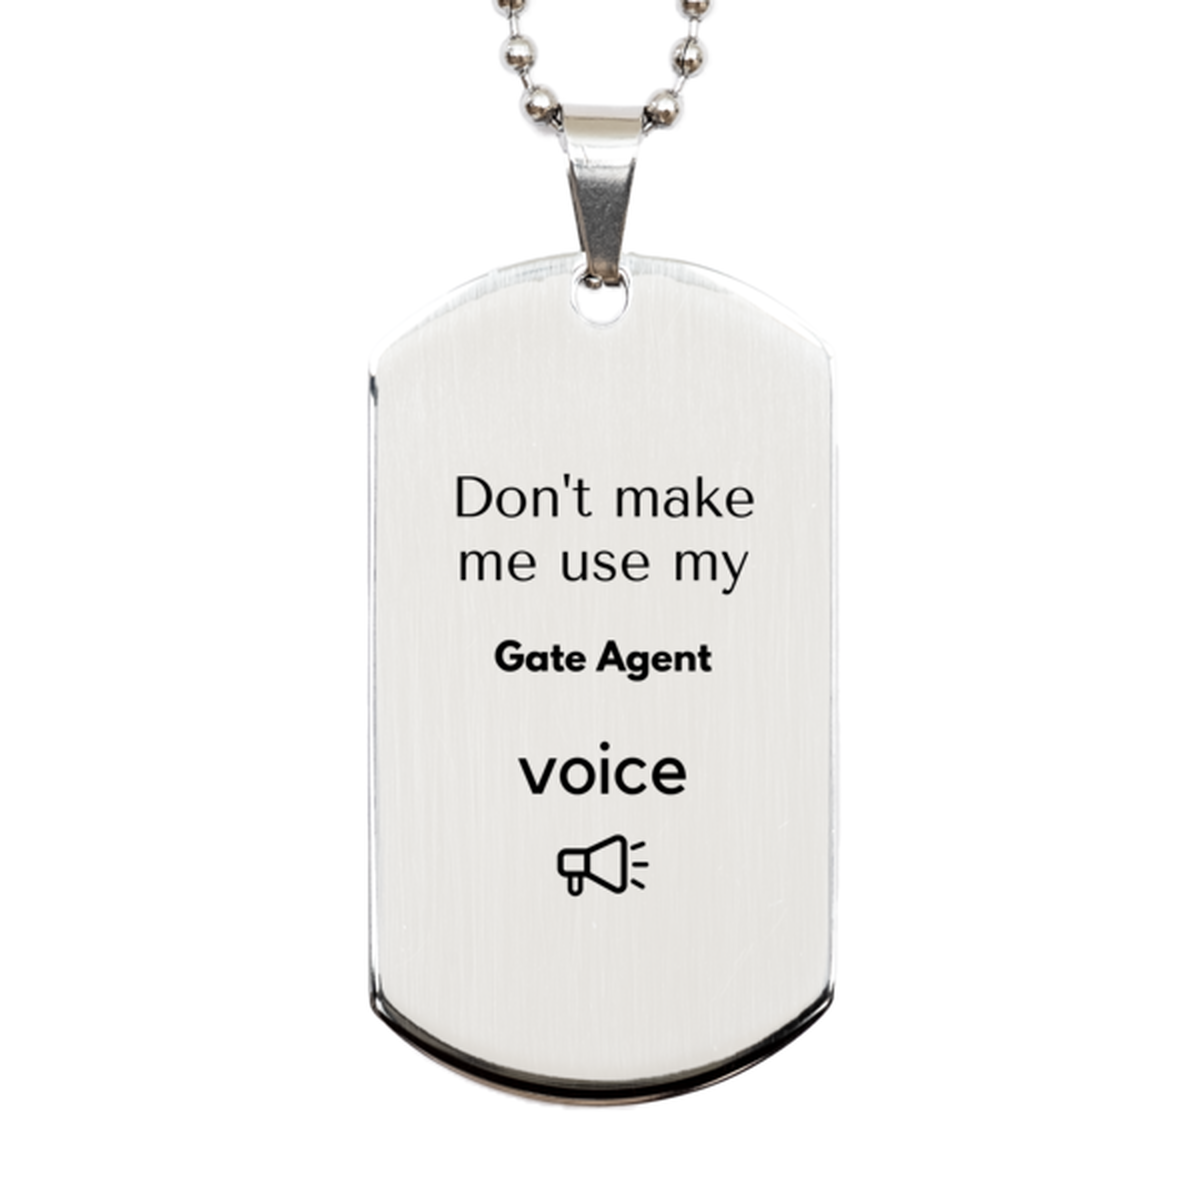 Don't make me use my Gate Agent voice, Sarcasm Gate Agent Gifts, Christmas Gate Agent Silver Dog Tag Birthday Unique Gifts For Gate Agent Coworkers, Men, Women, Colleague, Friends